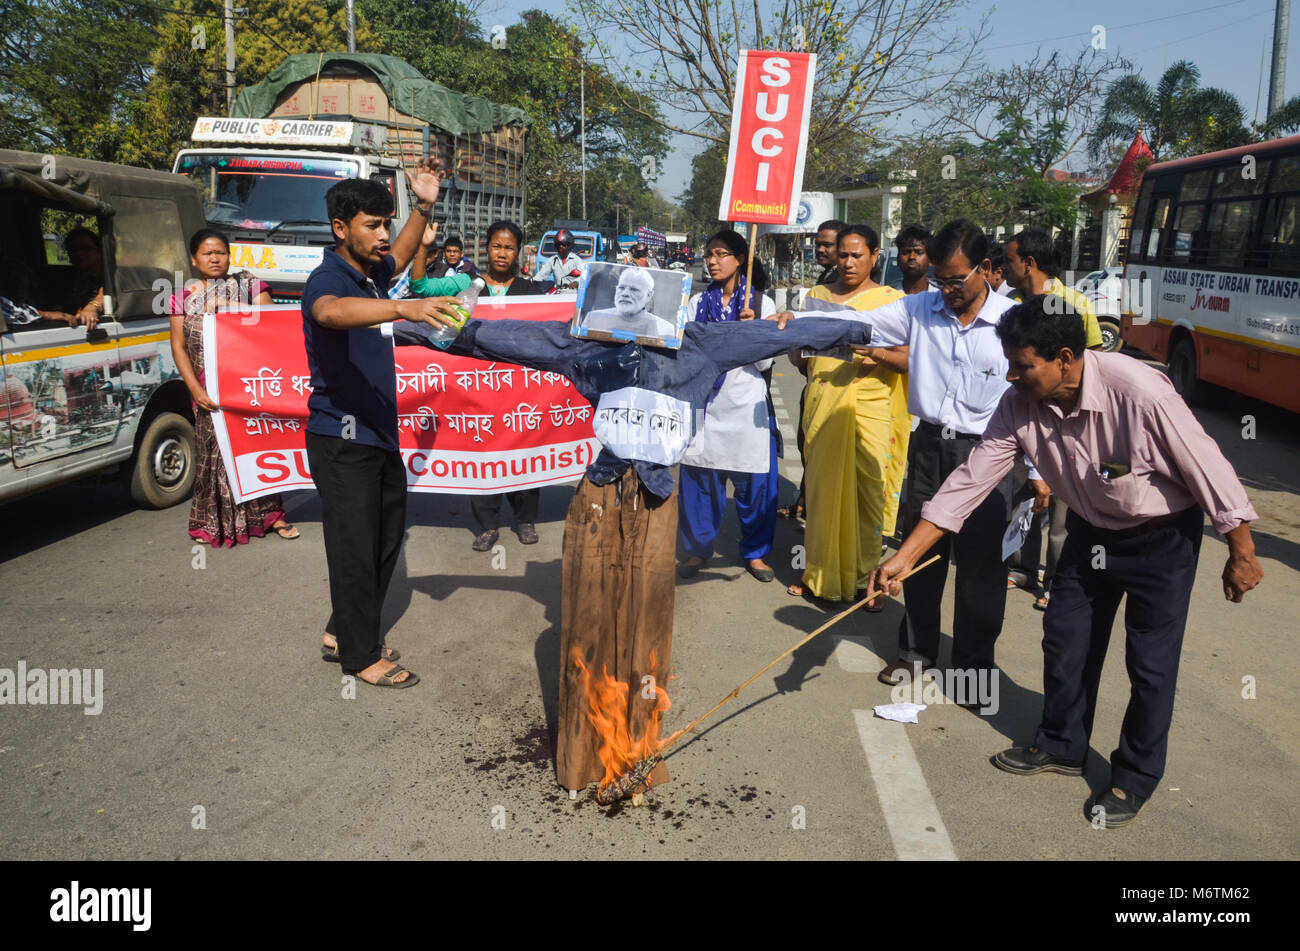 Activists of SUCI (C) (Socialist Unity Centre of India ) (Communist) Assam state committee burn down an effigy of Indian Prime Minister Narendra Modi during a protest against Vladimir Lenin statue demolished in Tripura. (Photo by David Talukdar / Pacific Press) Stock Photo